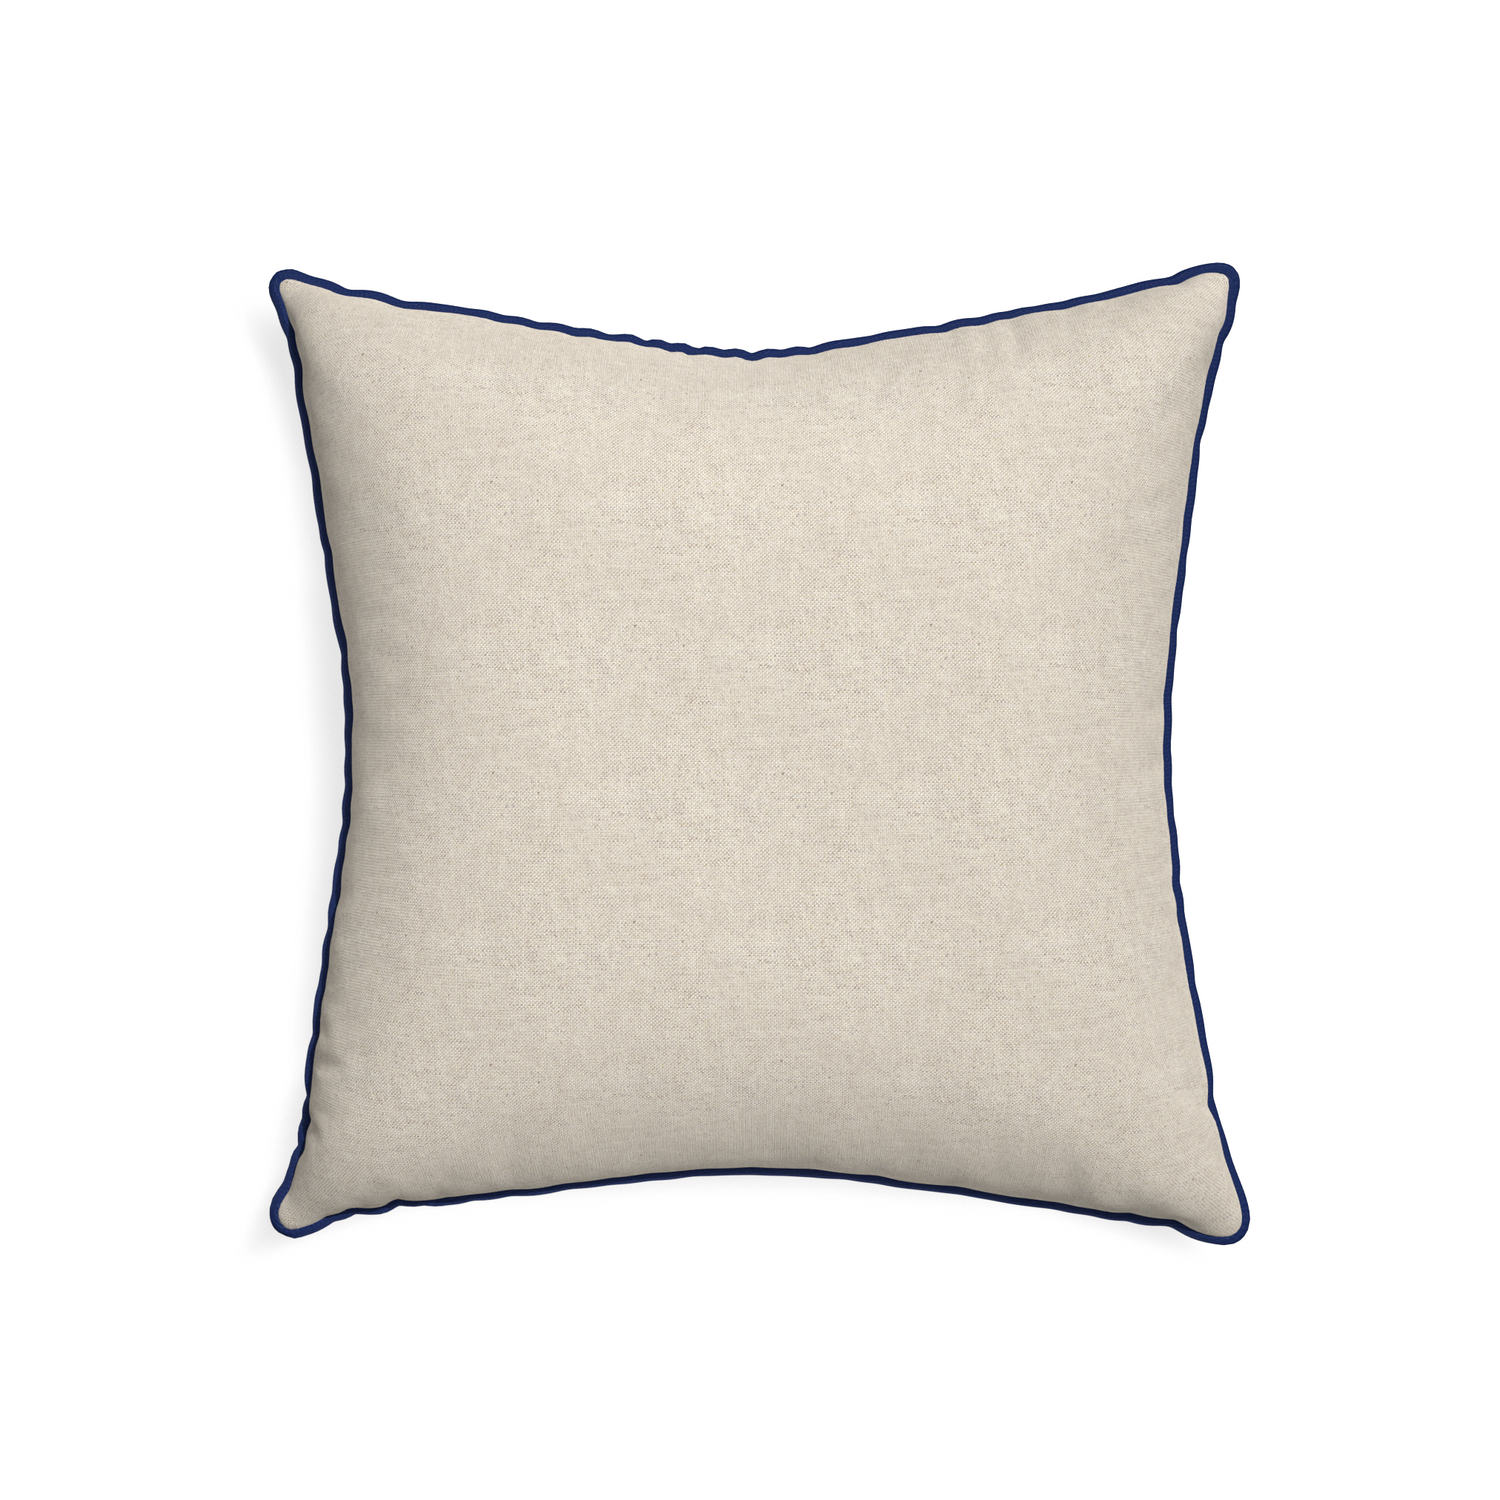 22-square oat custom pillow with midnight piping on white background